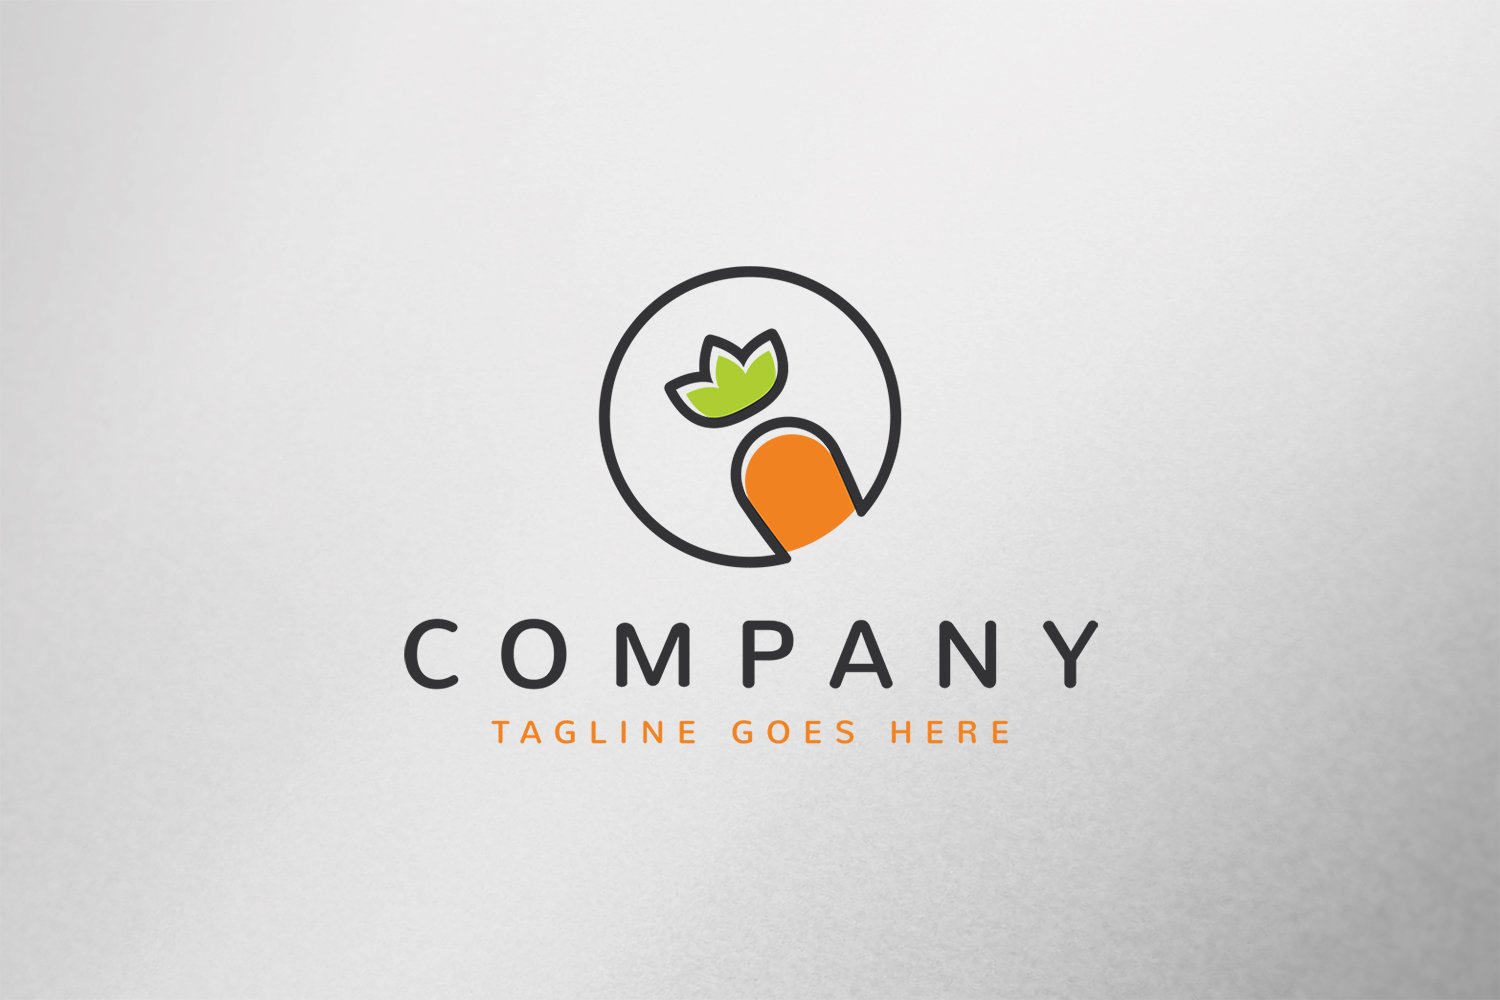 Carrot Logo Template cover image.